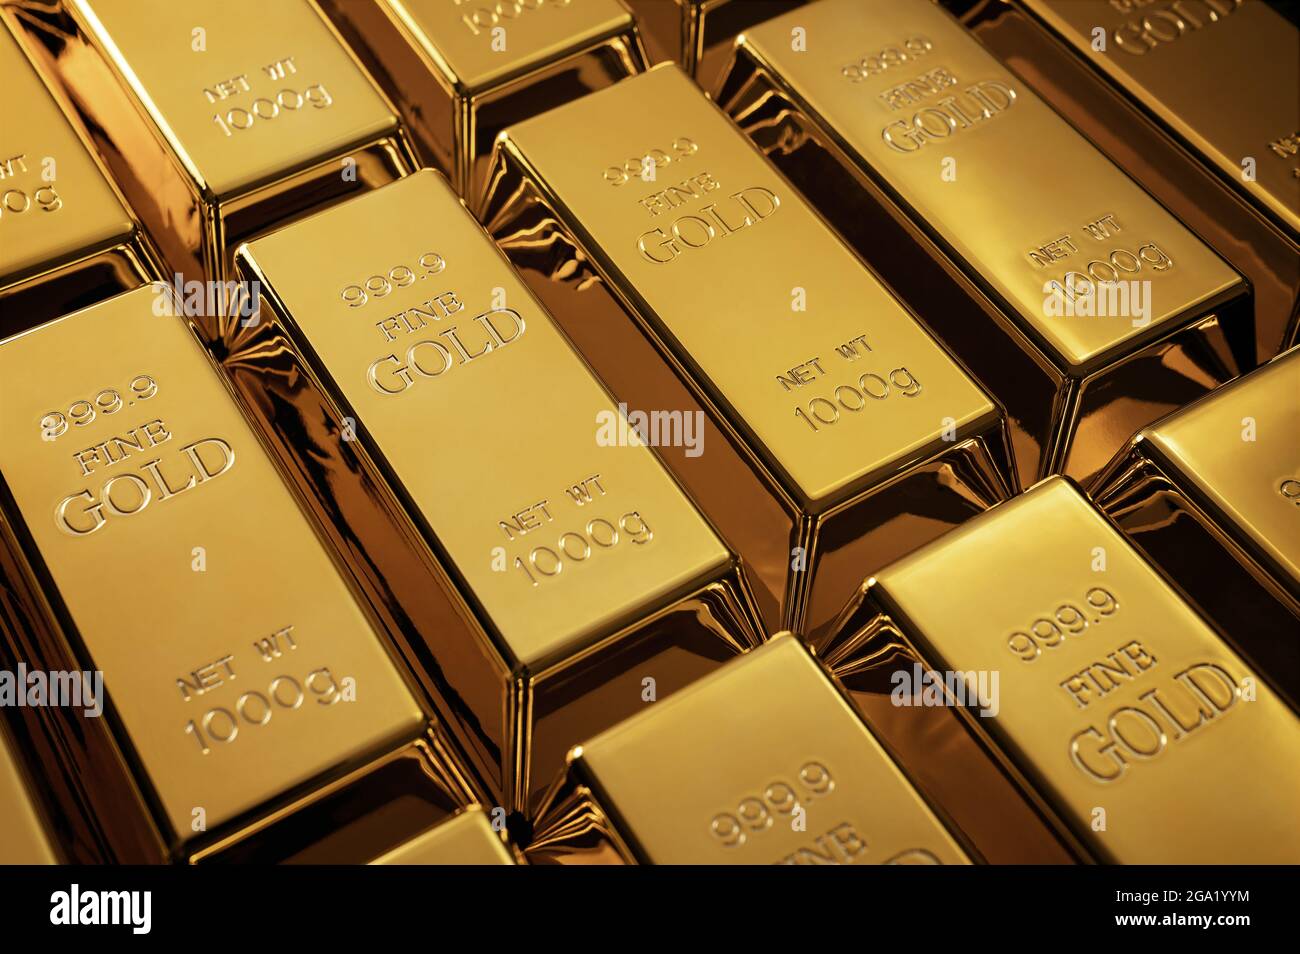 Gold bars background, investment concept Stock Photo